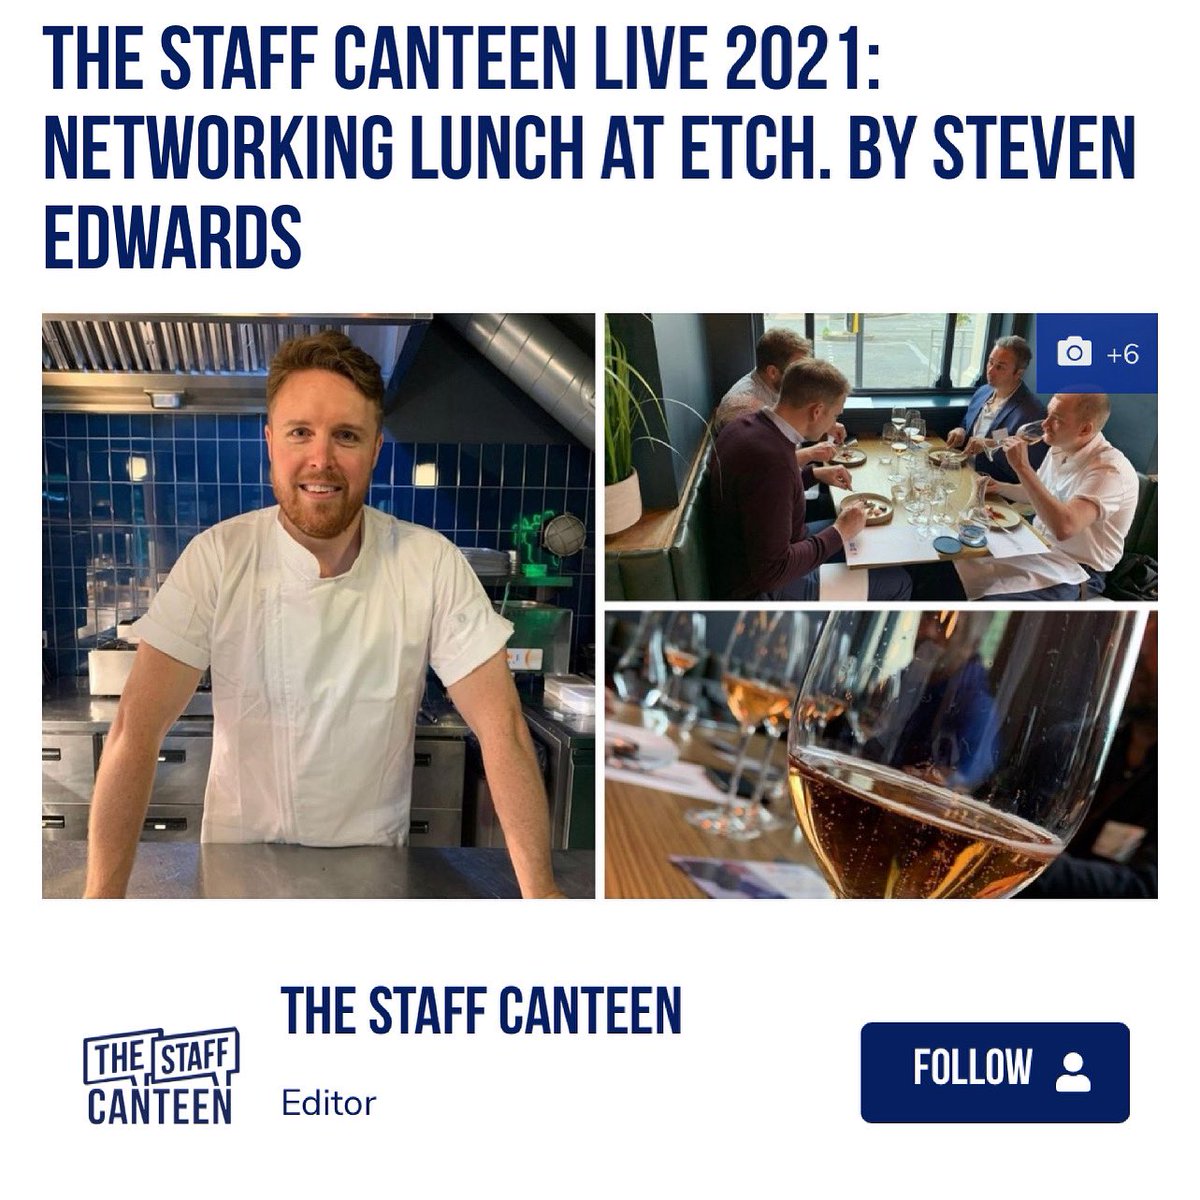 Great networking lunch from @thestaffcanteen hosted by @EtchFood Thank you for the invite 🙌

.
#greekfood #visitbrighton #brighton #hove #restaurantbrighton #hoveactually #brightonblogger #nostos #hoverestaurant #brightonfood #brightonrestaurant #awardwinning